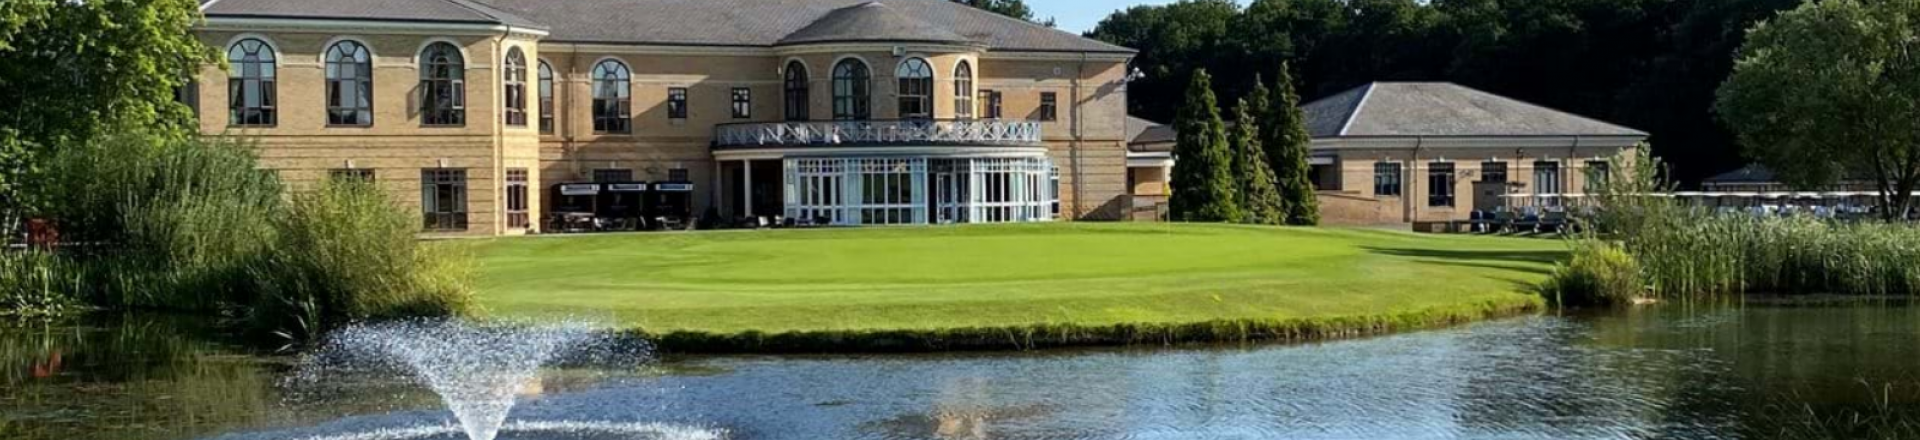 The Lakes Golf Course at Belton Woods Golf Club